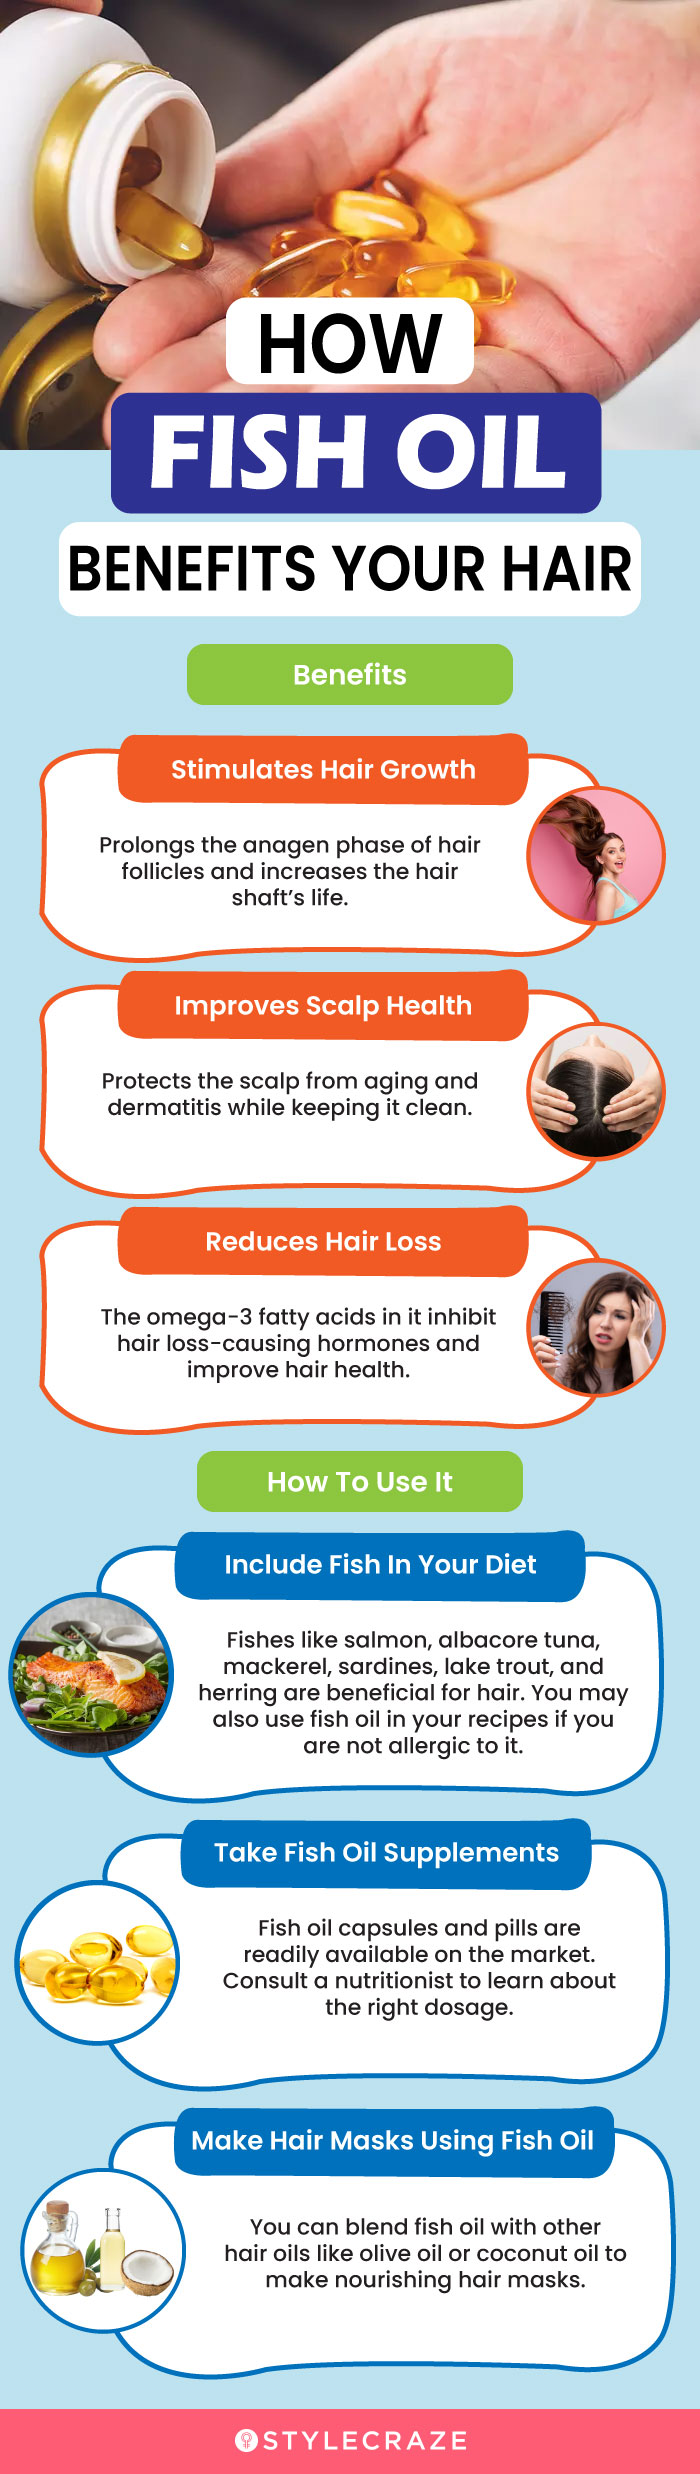 how fish oil benefits hair (infographic)